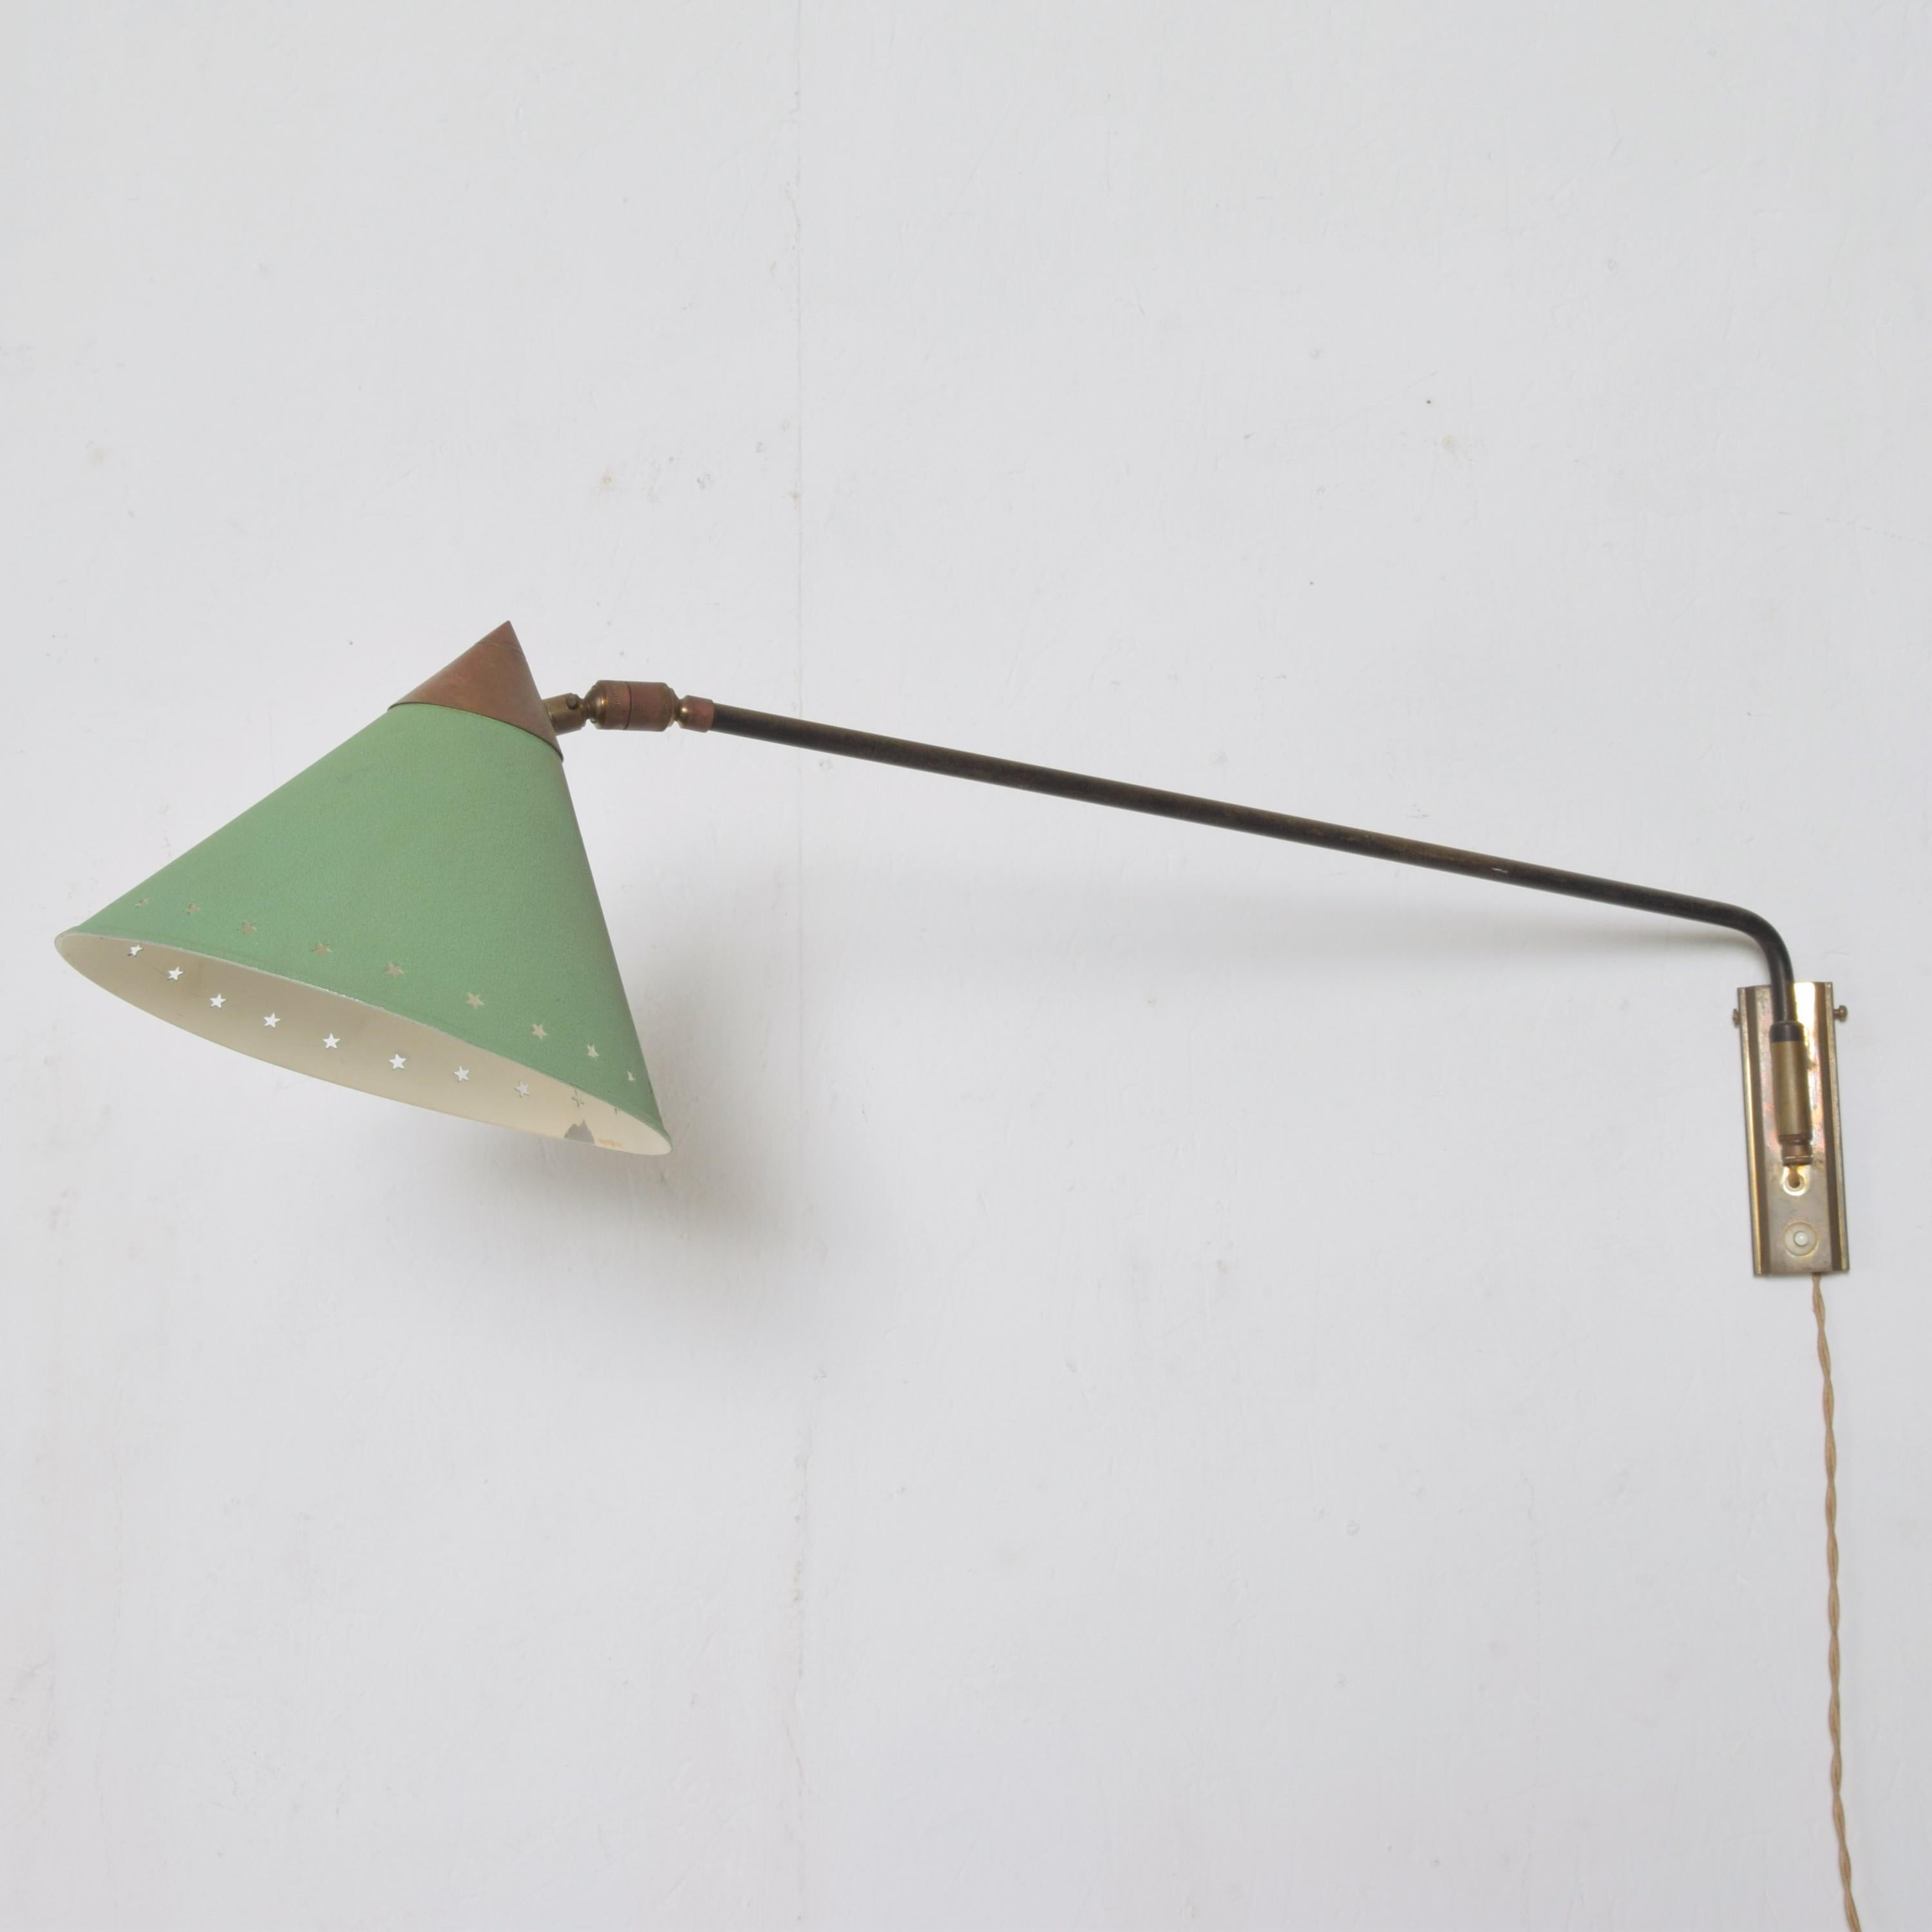 Pierre Guariche Pistachio green cone wall lamp perfect patina modern sexy wall sconce, France, 1950s
No maker stamp apparent. Attributed to the style of Pierre Guariche.
Measures: Height 8.5 in.
Width 30 in
Depth 13.25 in
Lamp attaches to the